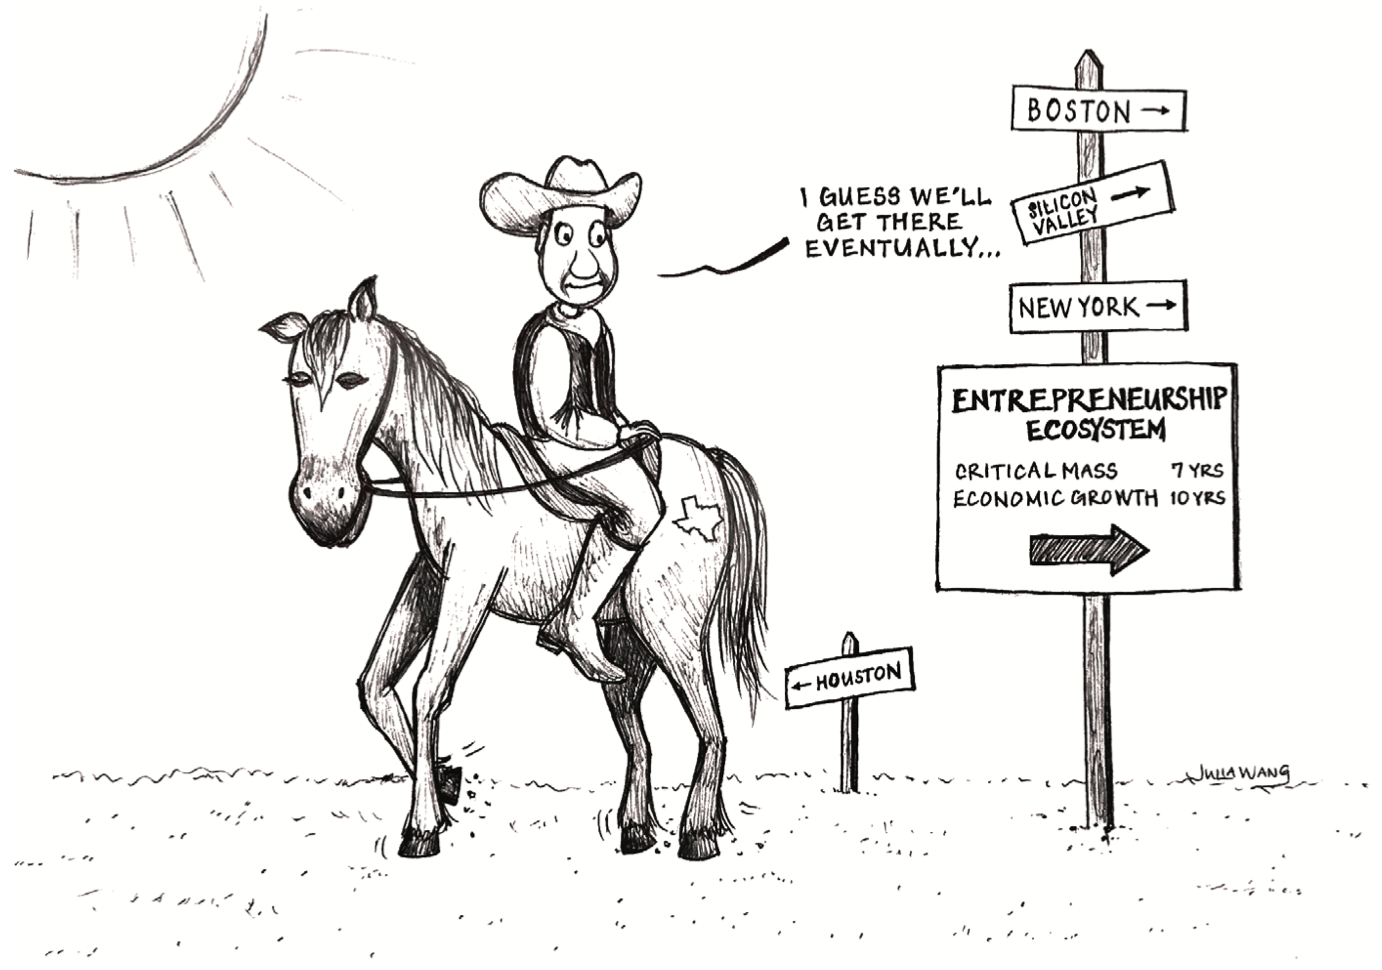 This drawing depicts a cowboy on a horse hoping Houston will catch up with other cities' entrepreneurship opportunities someday.